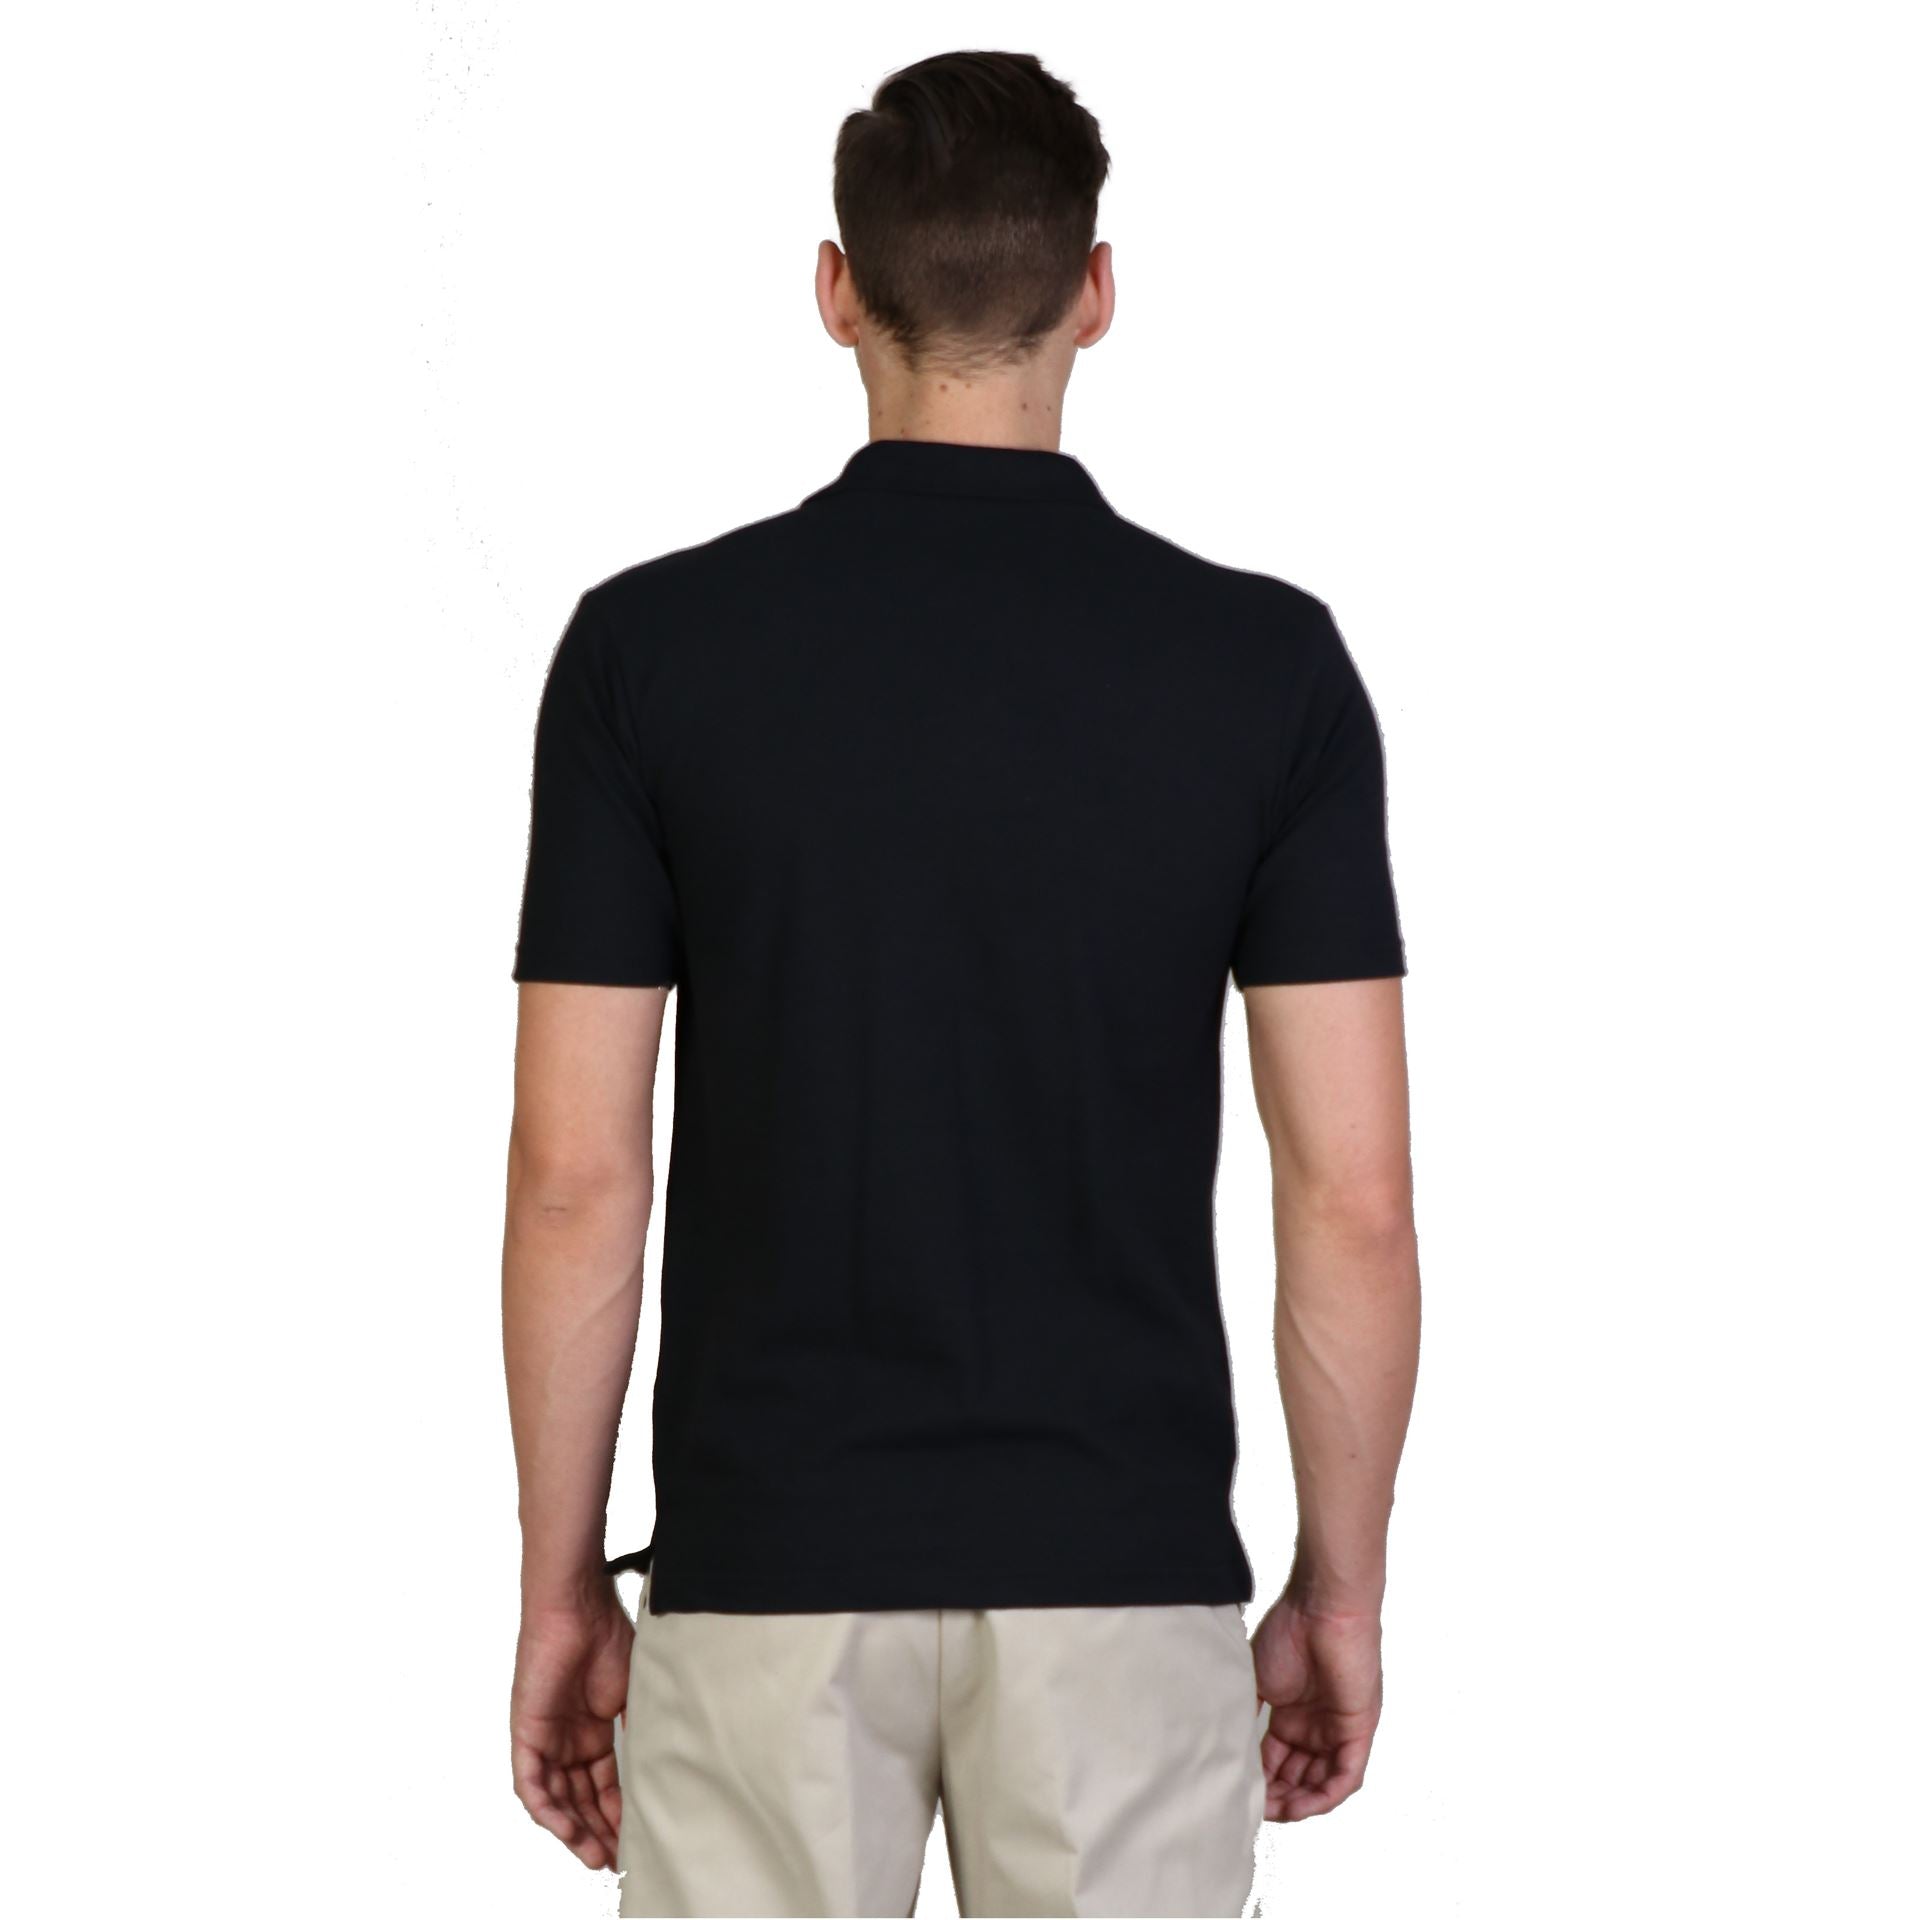 240g Classic Heavy Weight Polo